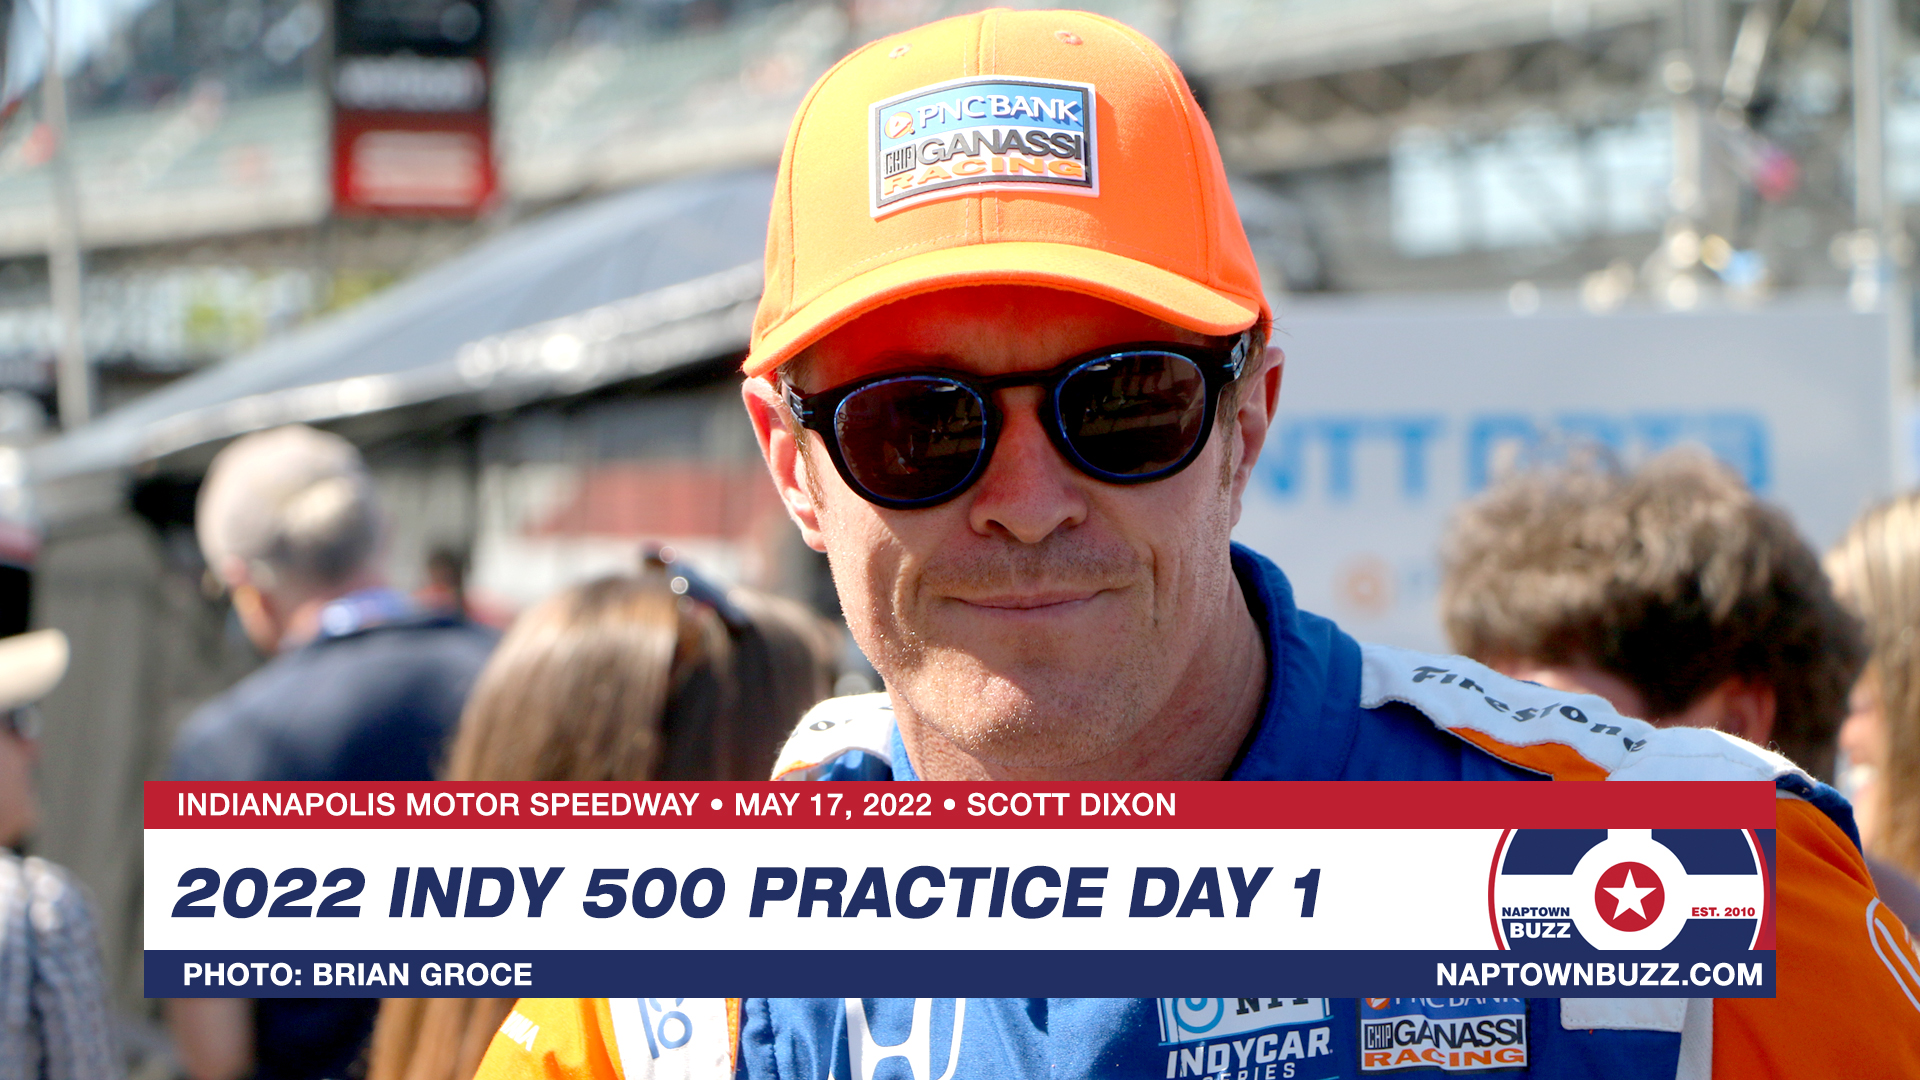 Scott Dixon on May 17, 2022, at Indianapolis Motor Speedway